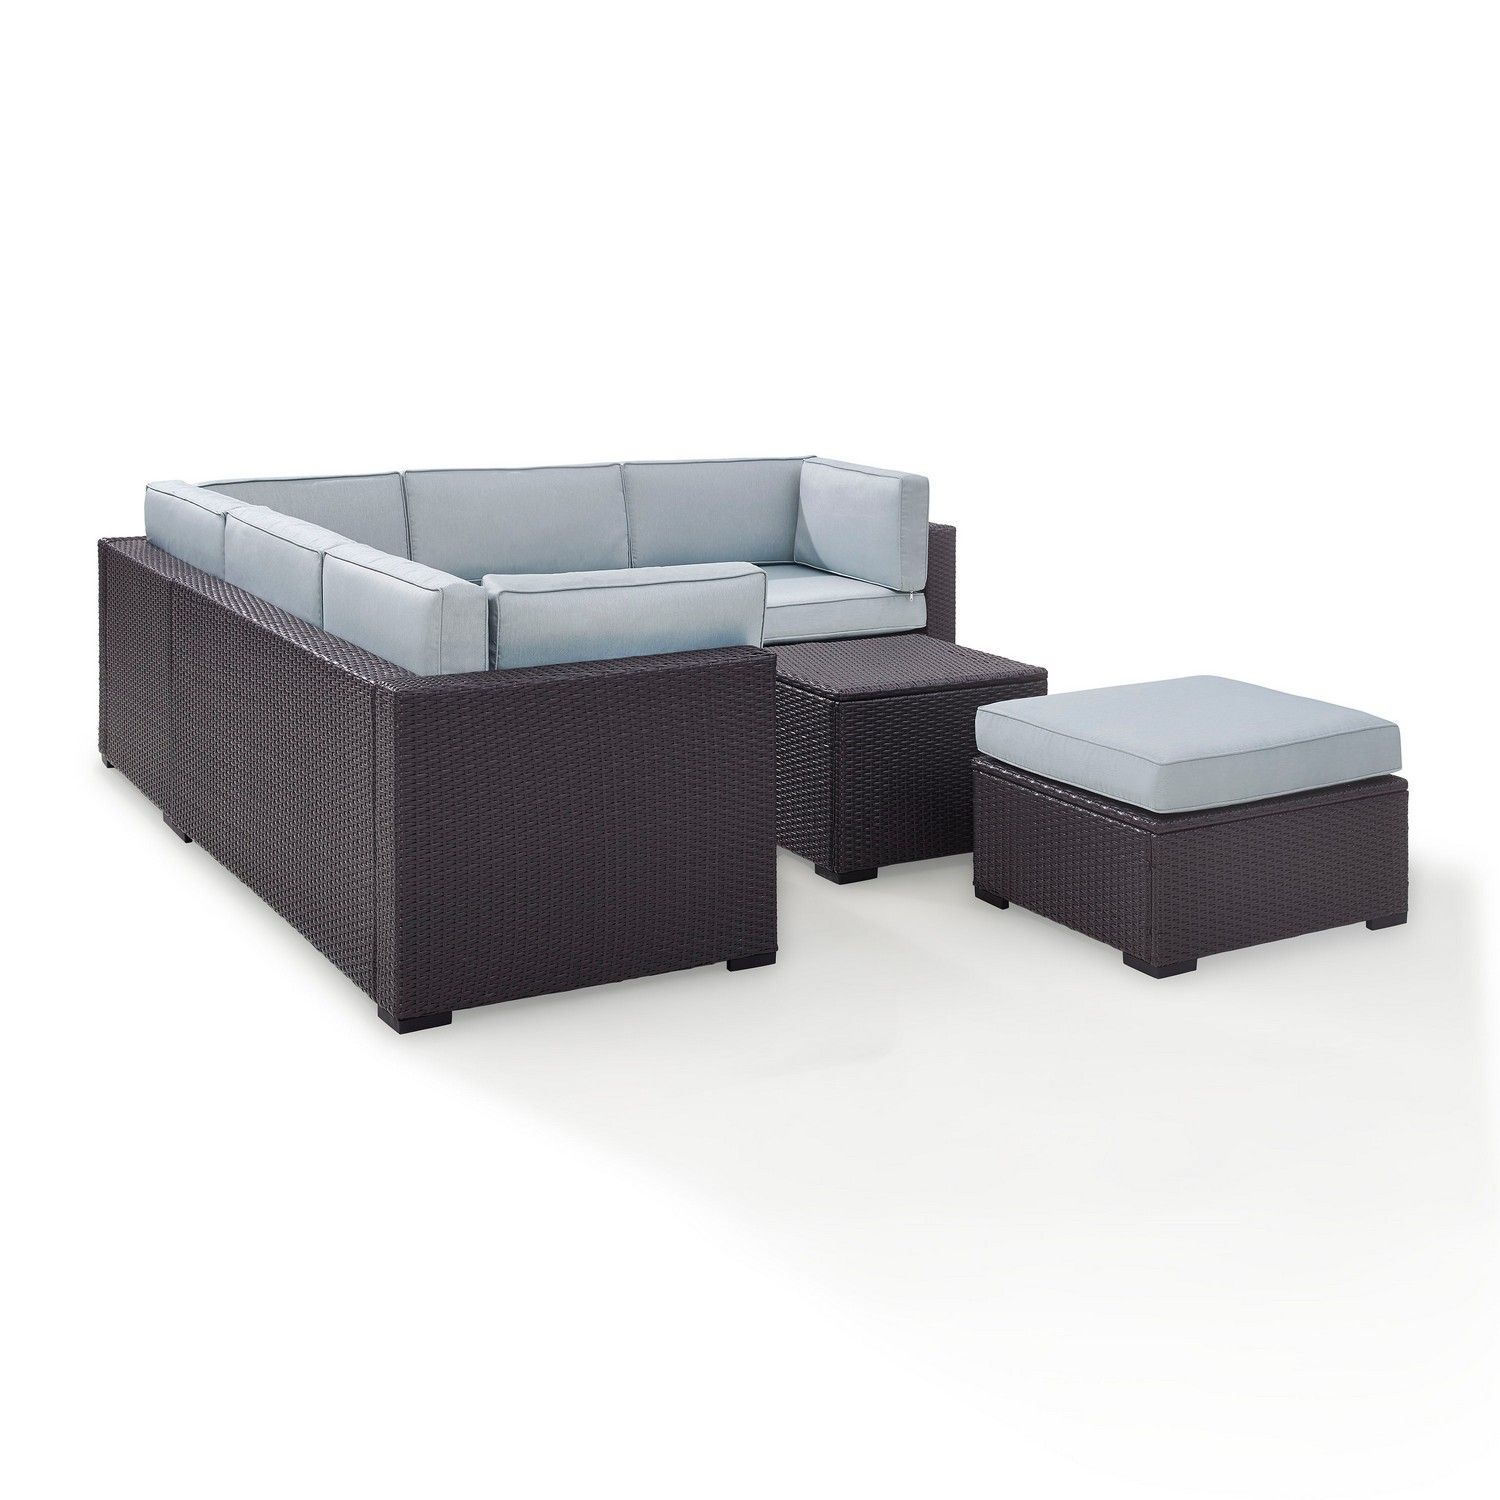 Crosley Biscayne 5-PC Outdoor Wicker Sectional Set - 2 Loveseats, Corner Chair, Coffee Table, Ottoman - Mist/Brown